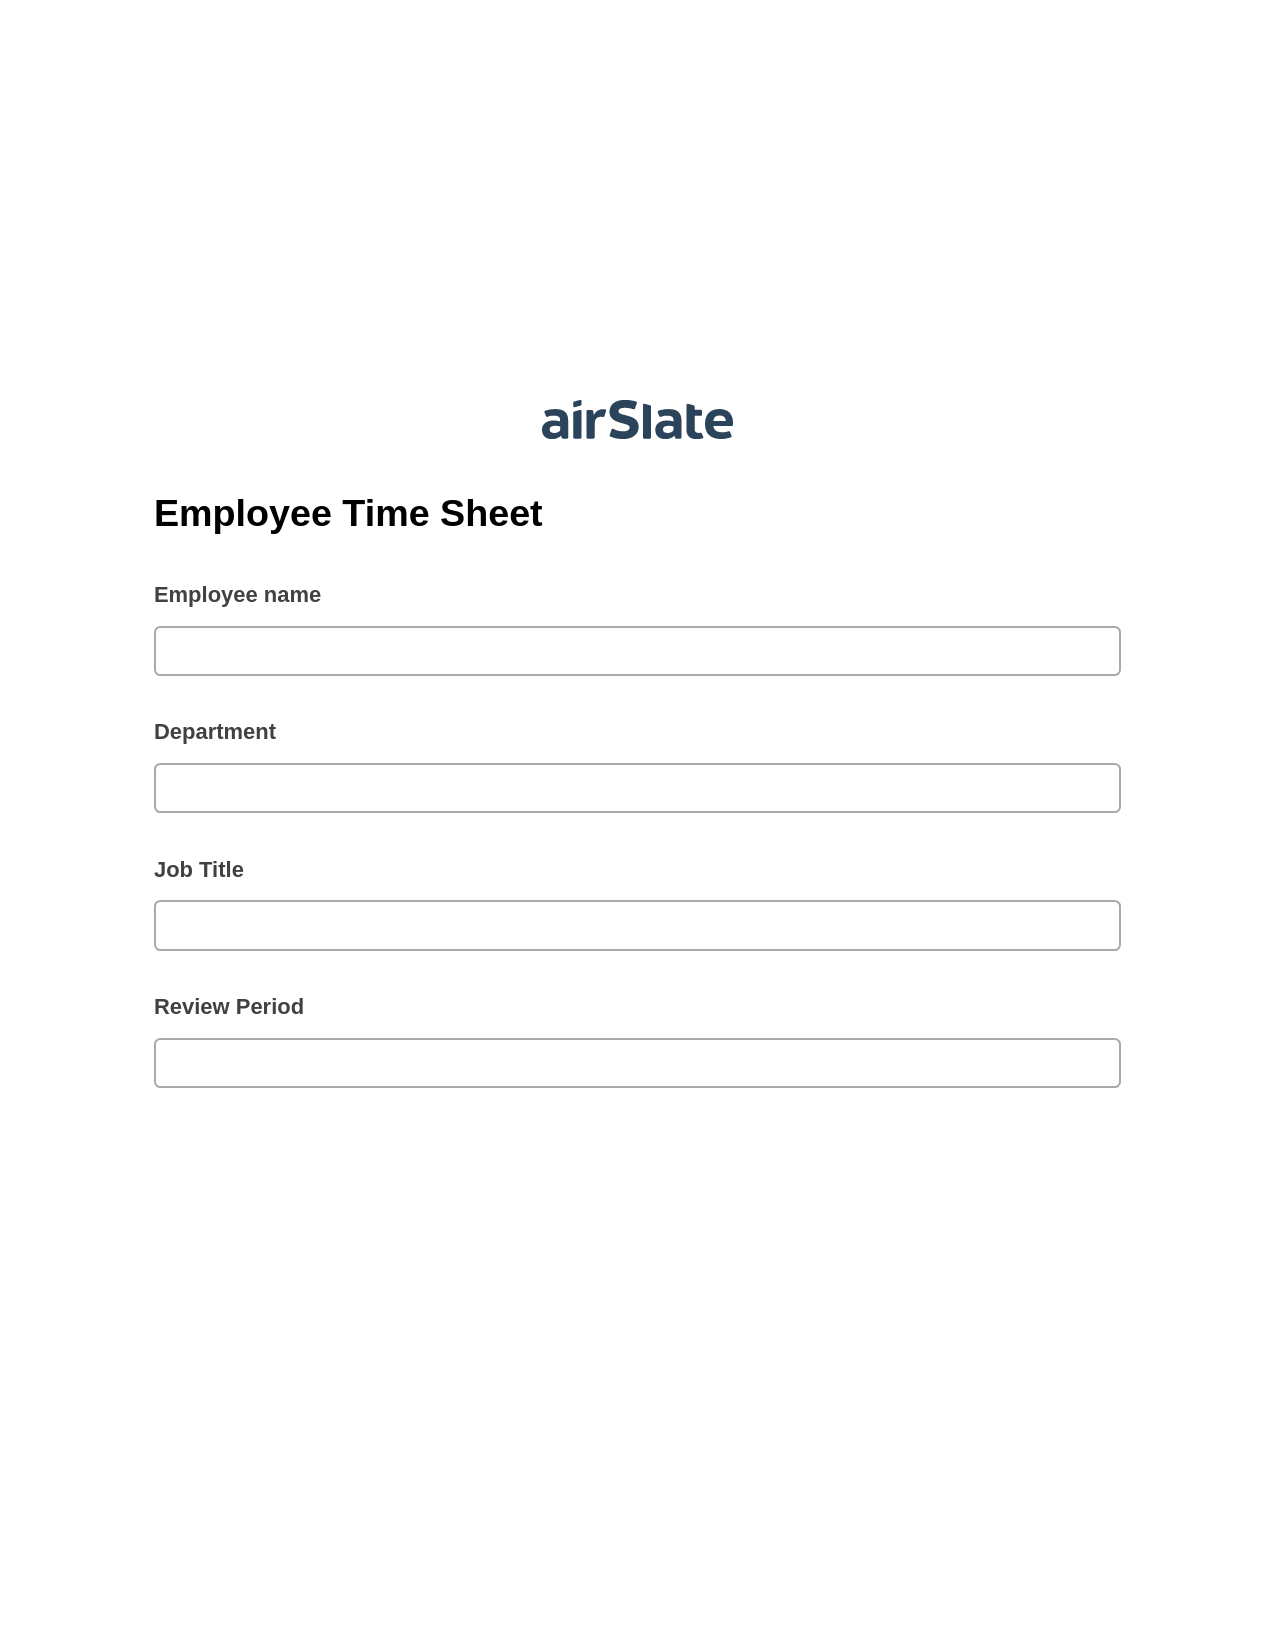 Employee Time Sheet Pre-fill from Google Sheets Bot, Create slate addon, Export to Salesforce Record Bot